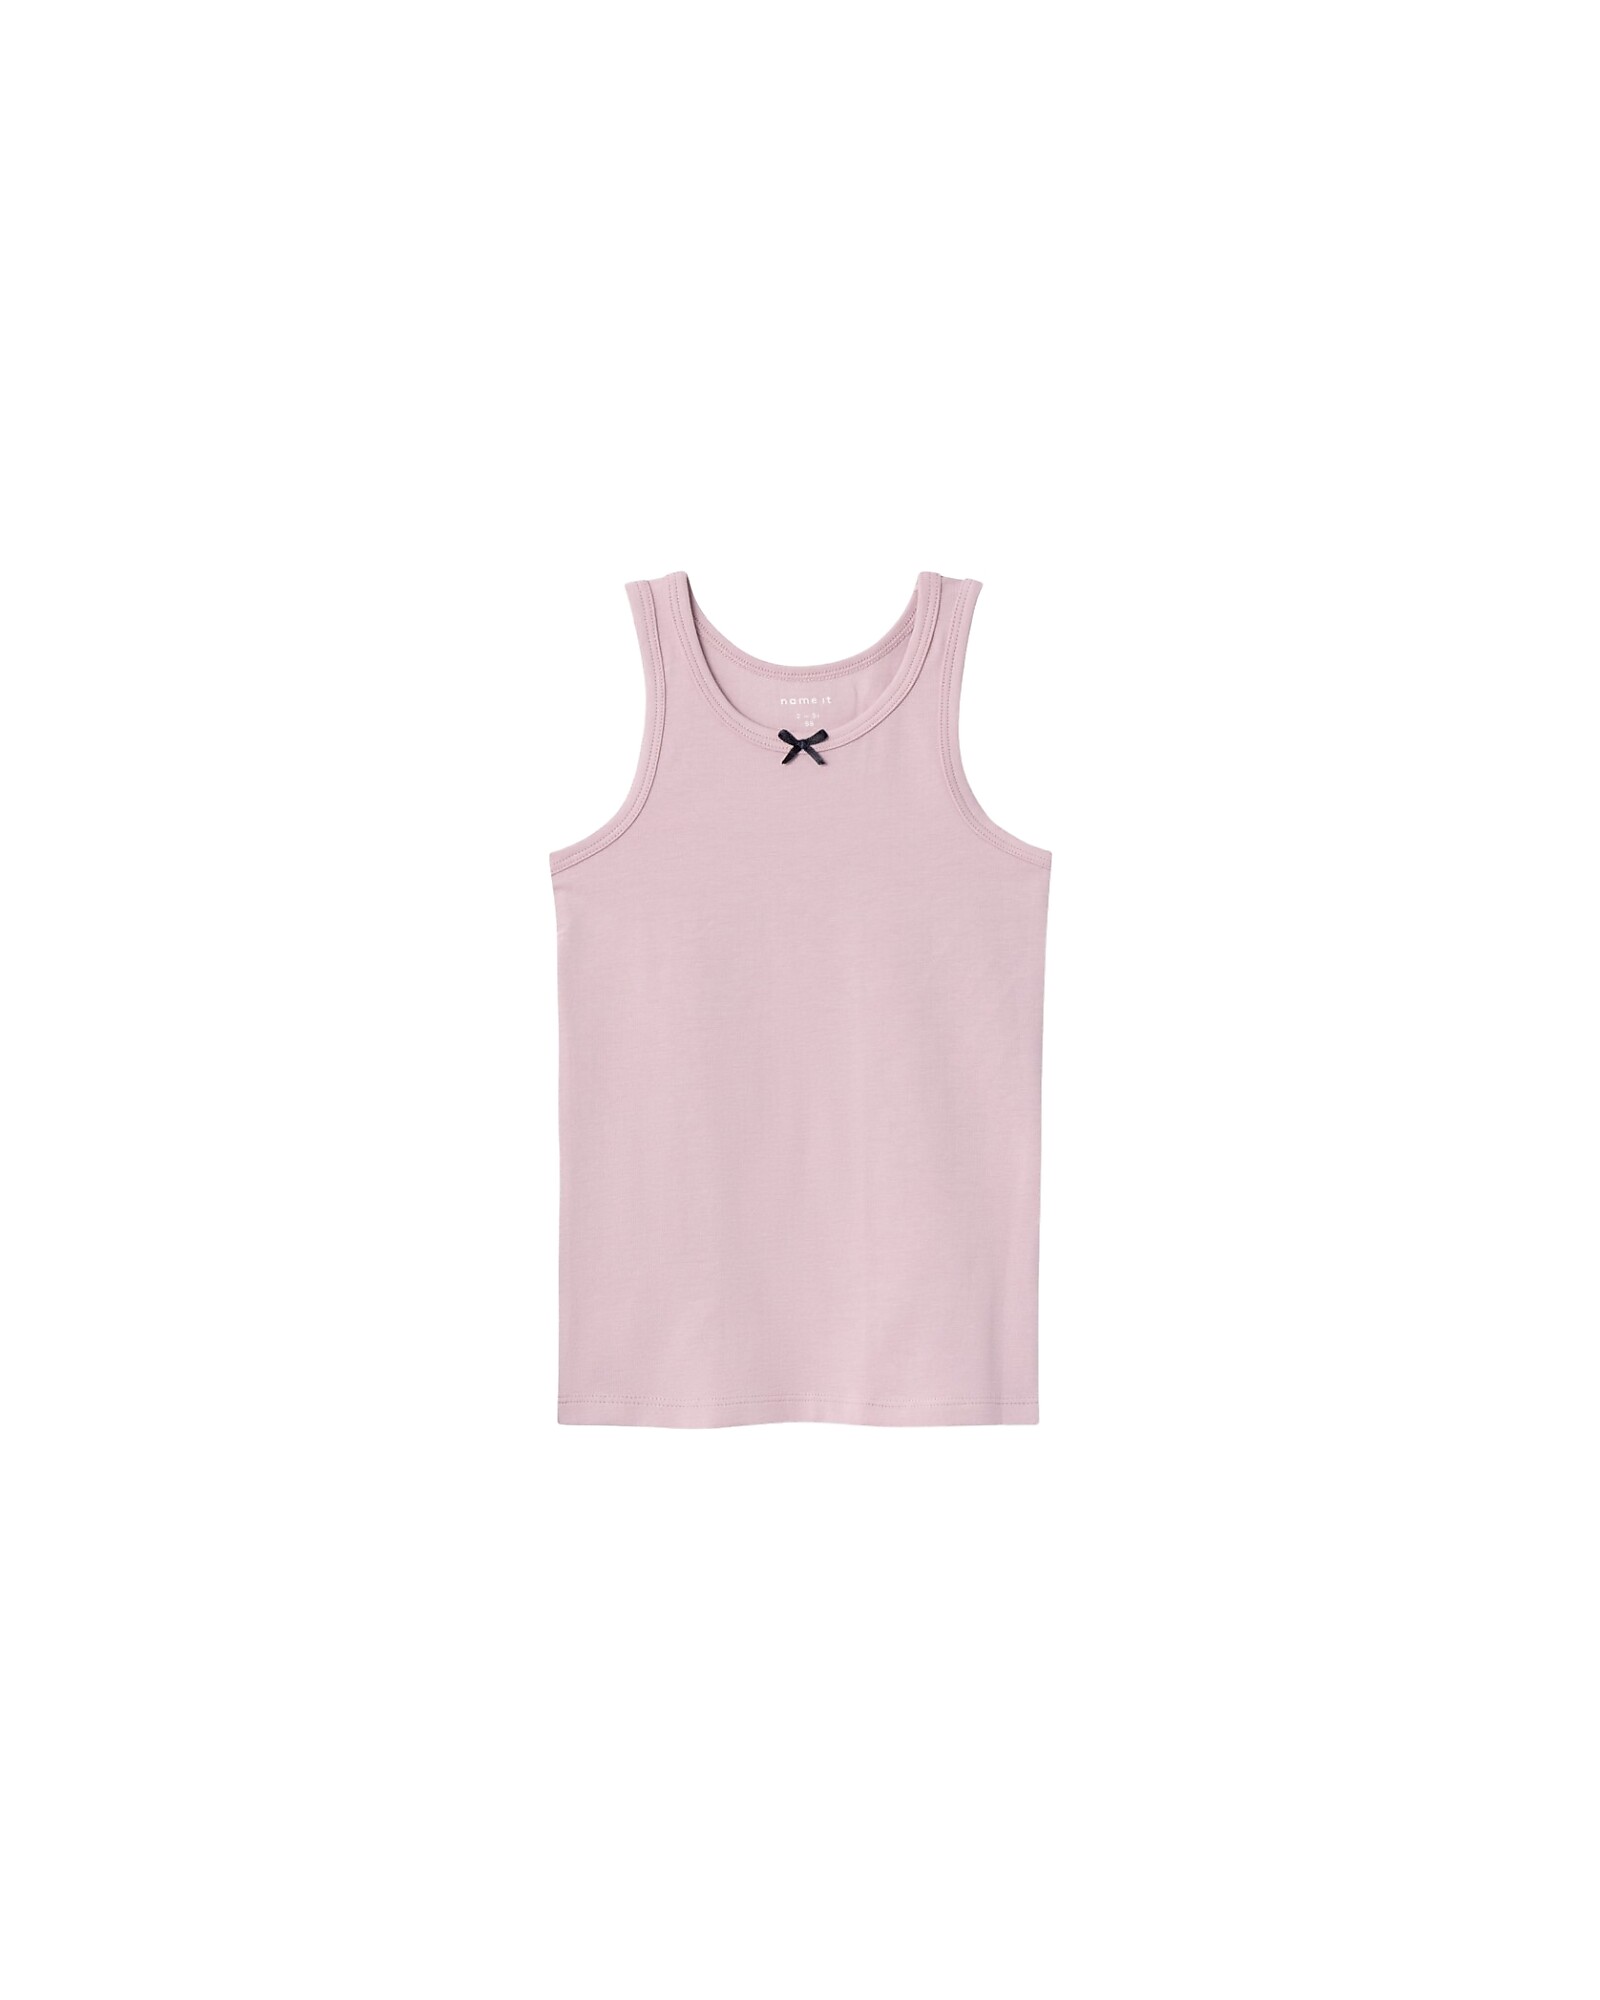 Name it Pack of 2 Tank Tops - Powder Pink and Cream with Flower Pattern -  Cotton unisex (bambini)